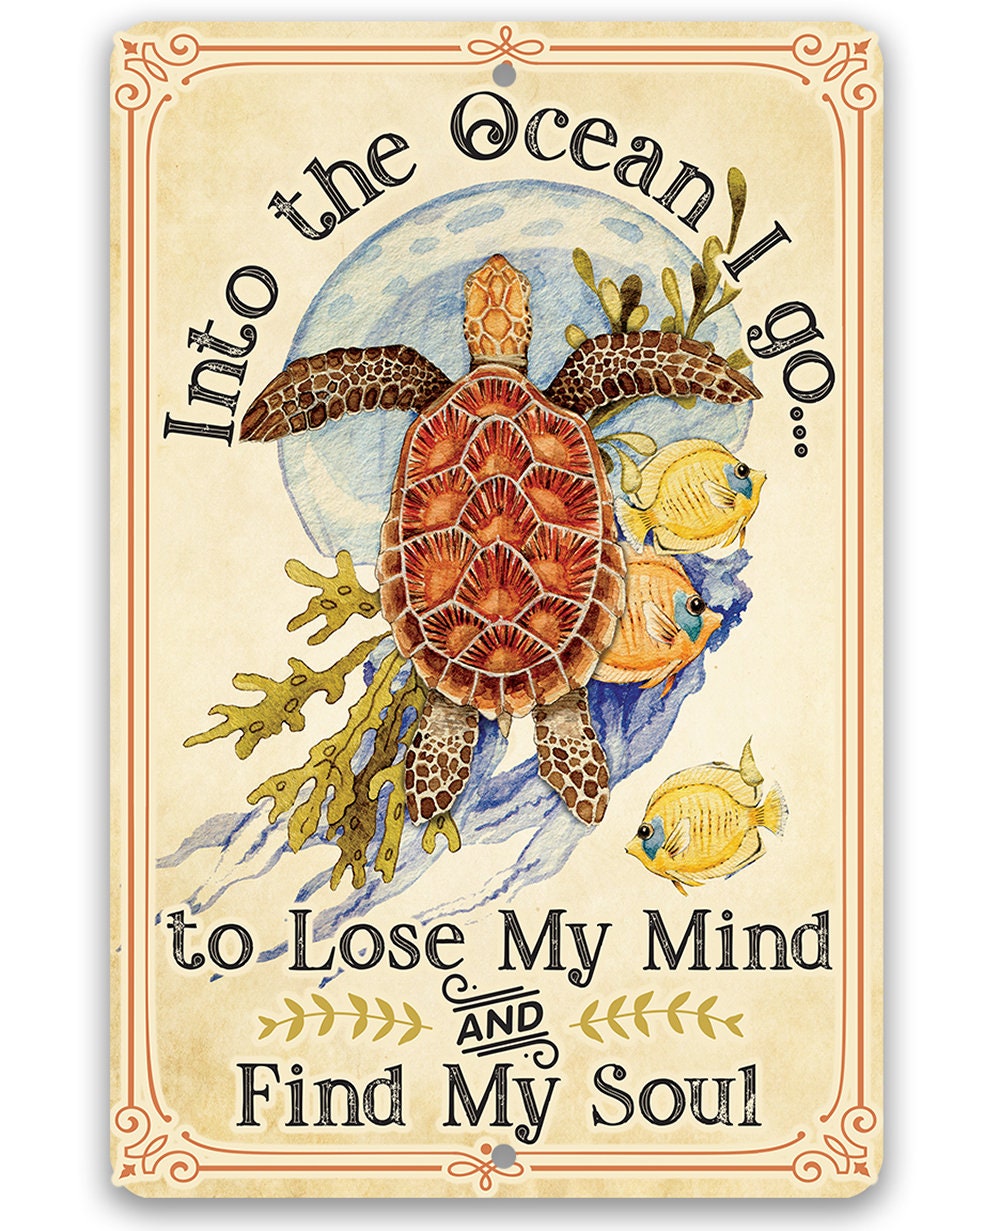 Into The Ocean I Go To Lose My Mind and Find My Soul - Metal Sign Metal Sign Lone Star Art 